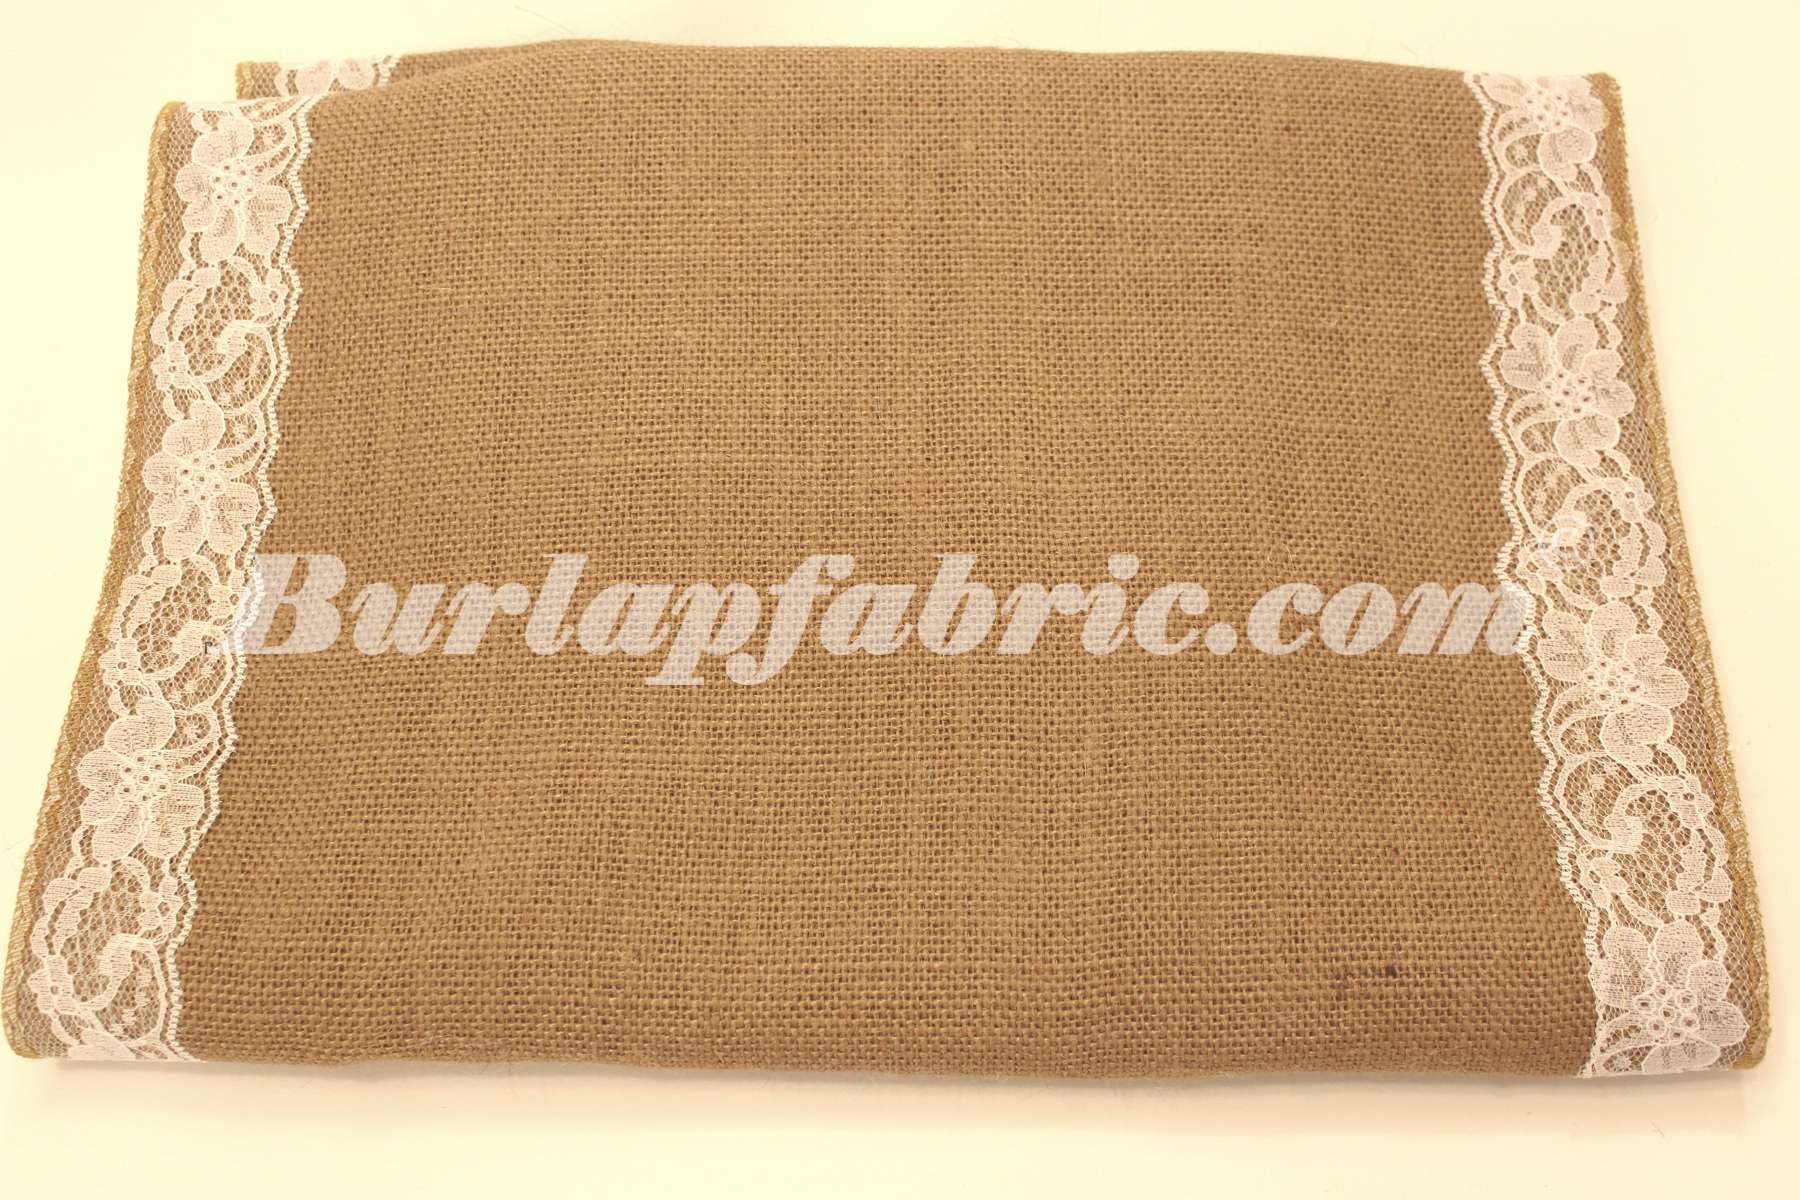 14" Idaho Burlap Runner with 2" White Lace Borders - Click Image to Close